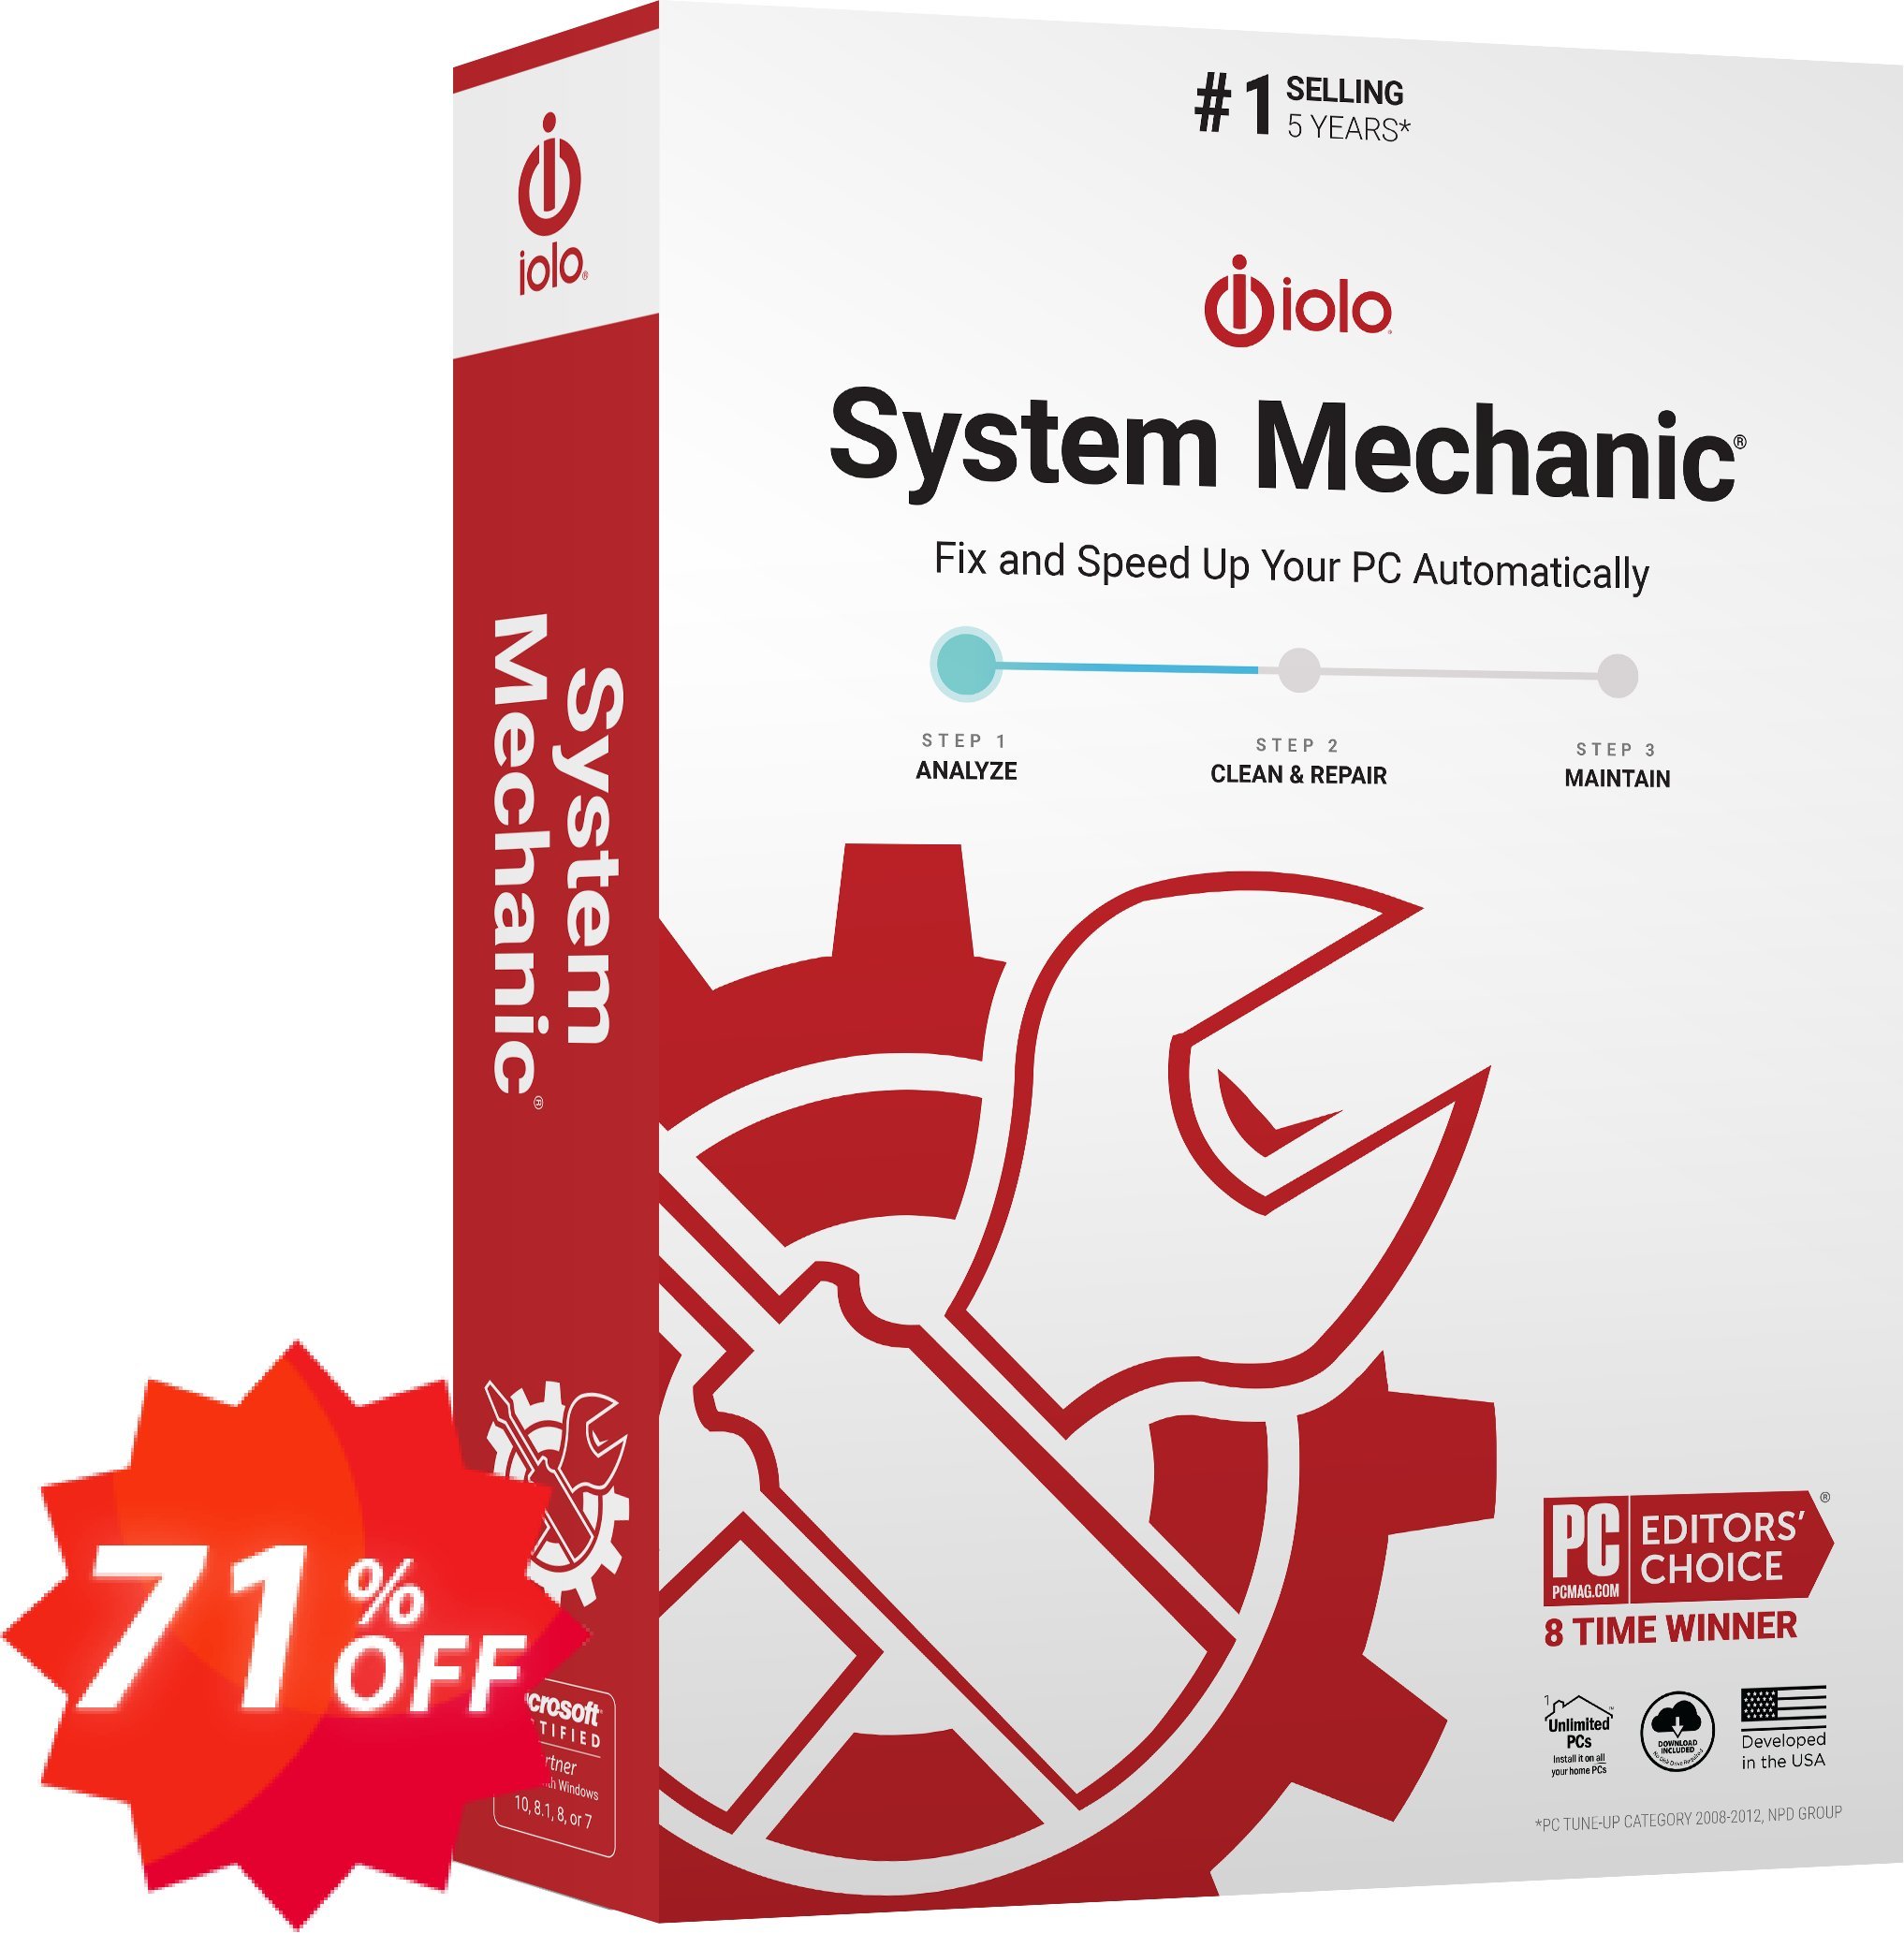 iolo System Mechanic 22 Coupon code 71% discount 